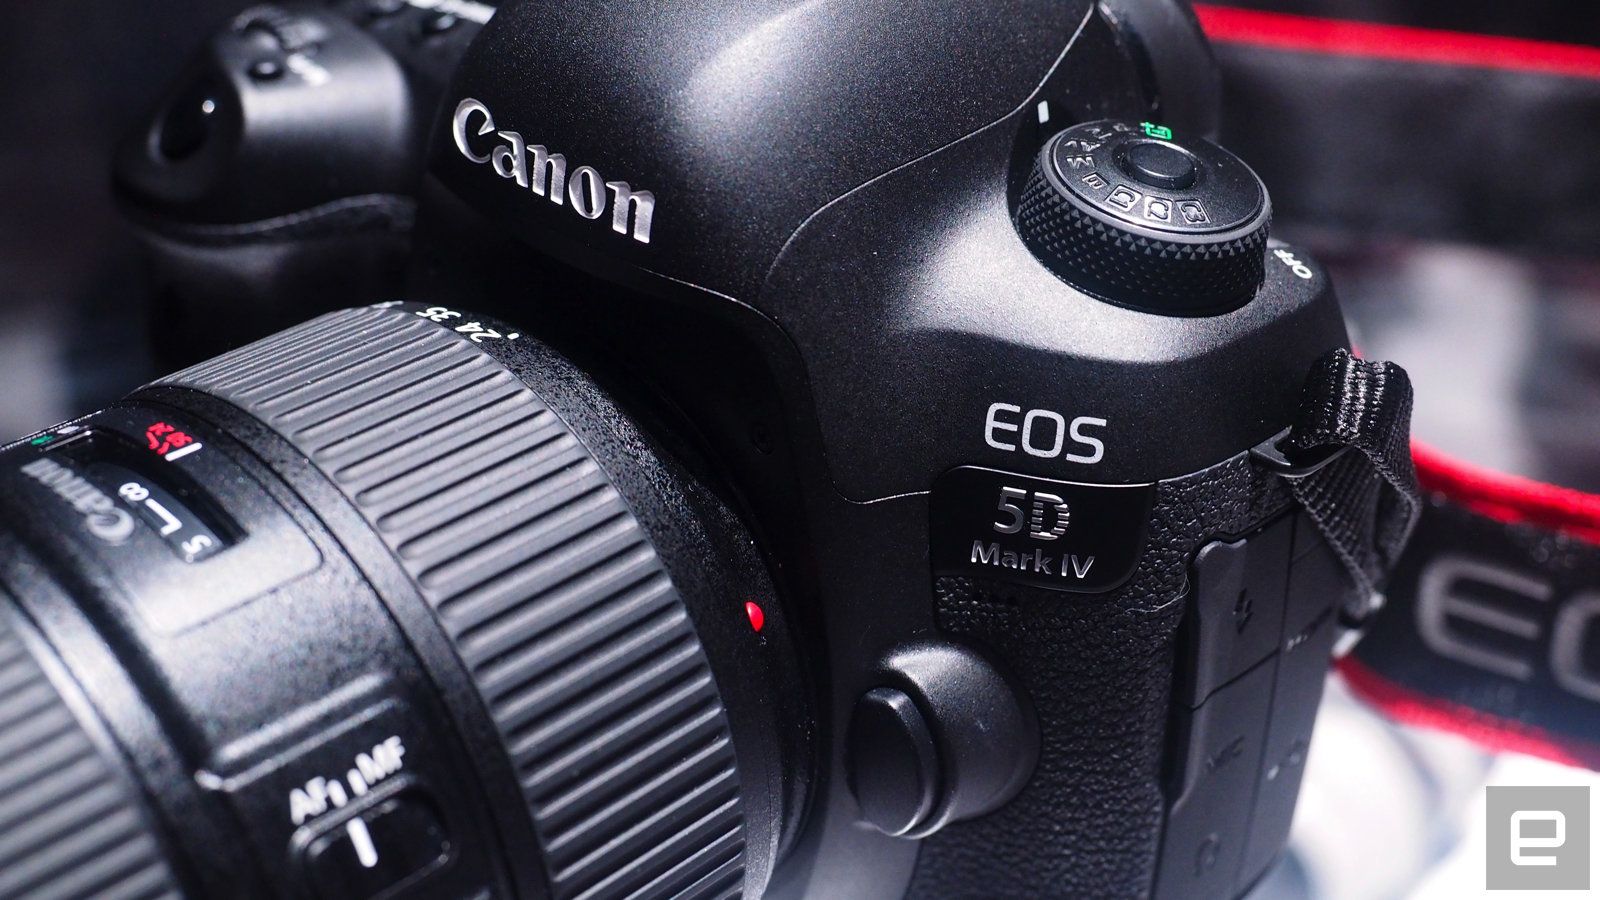 A first look at Canon's EOS 5D Mark IV